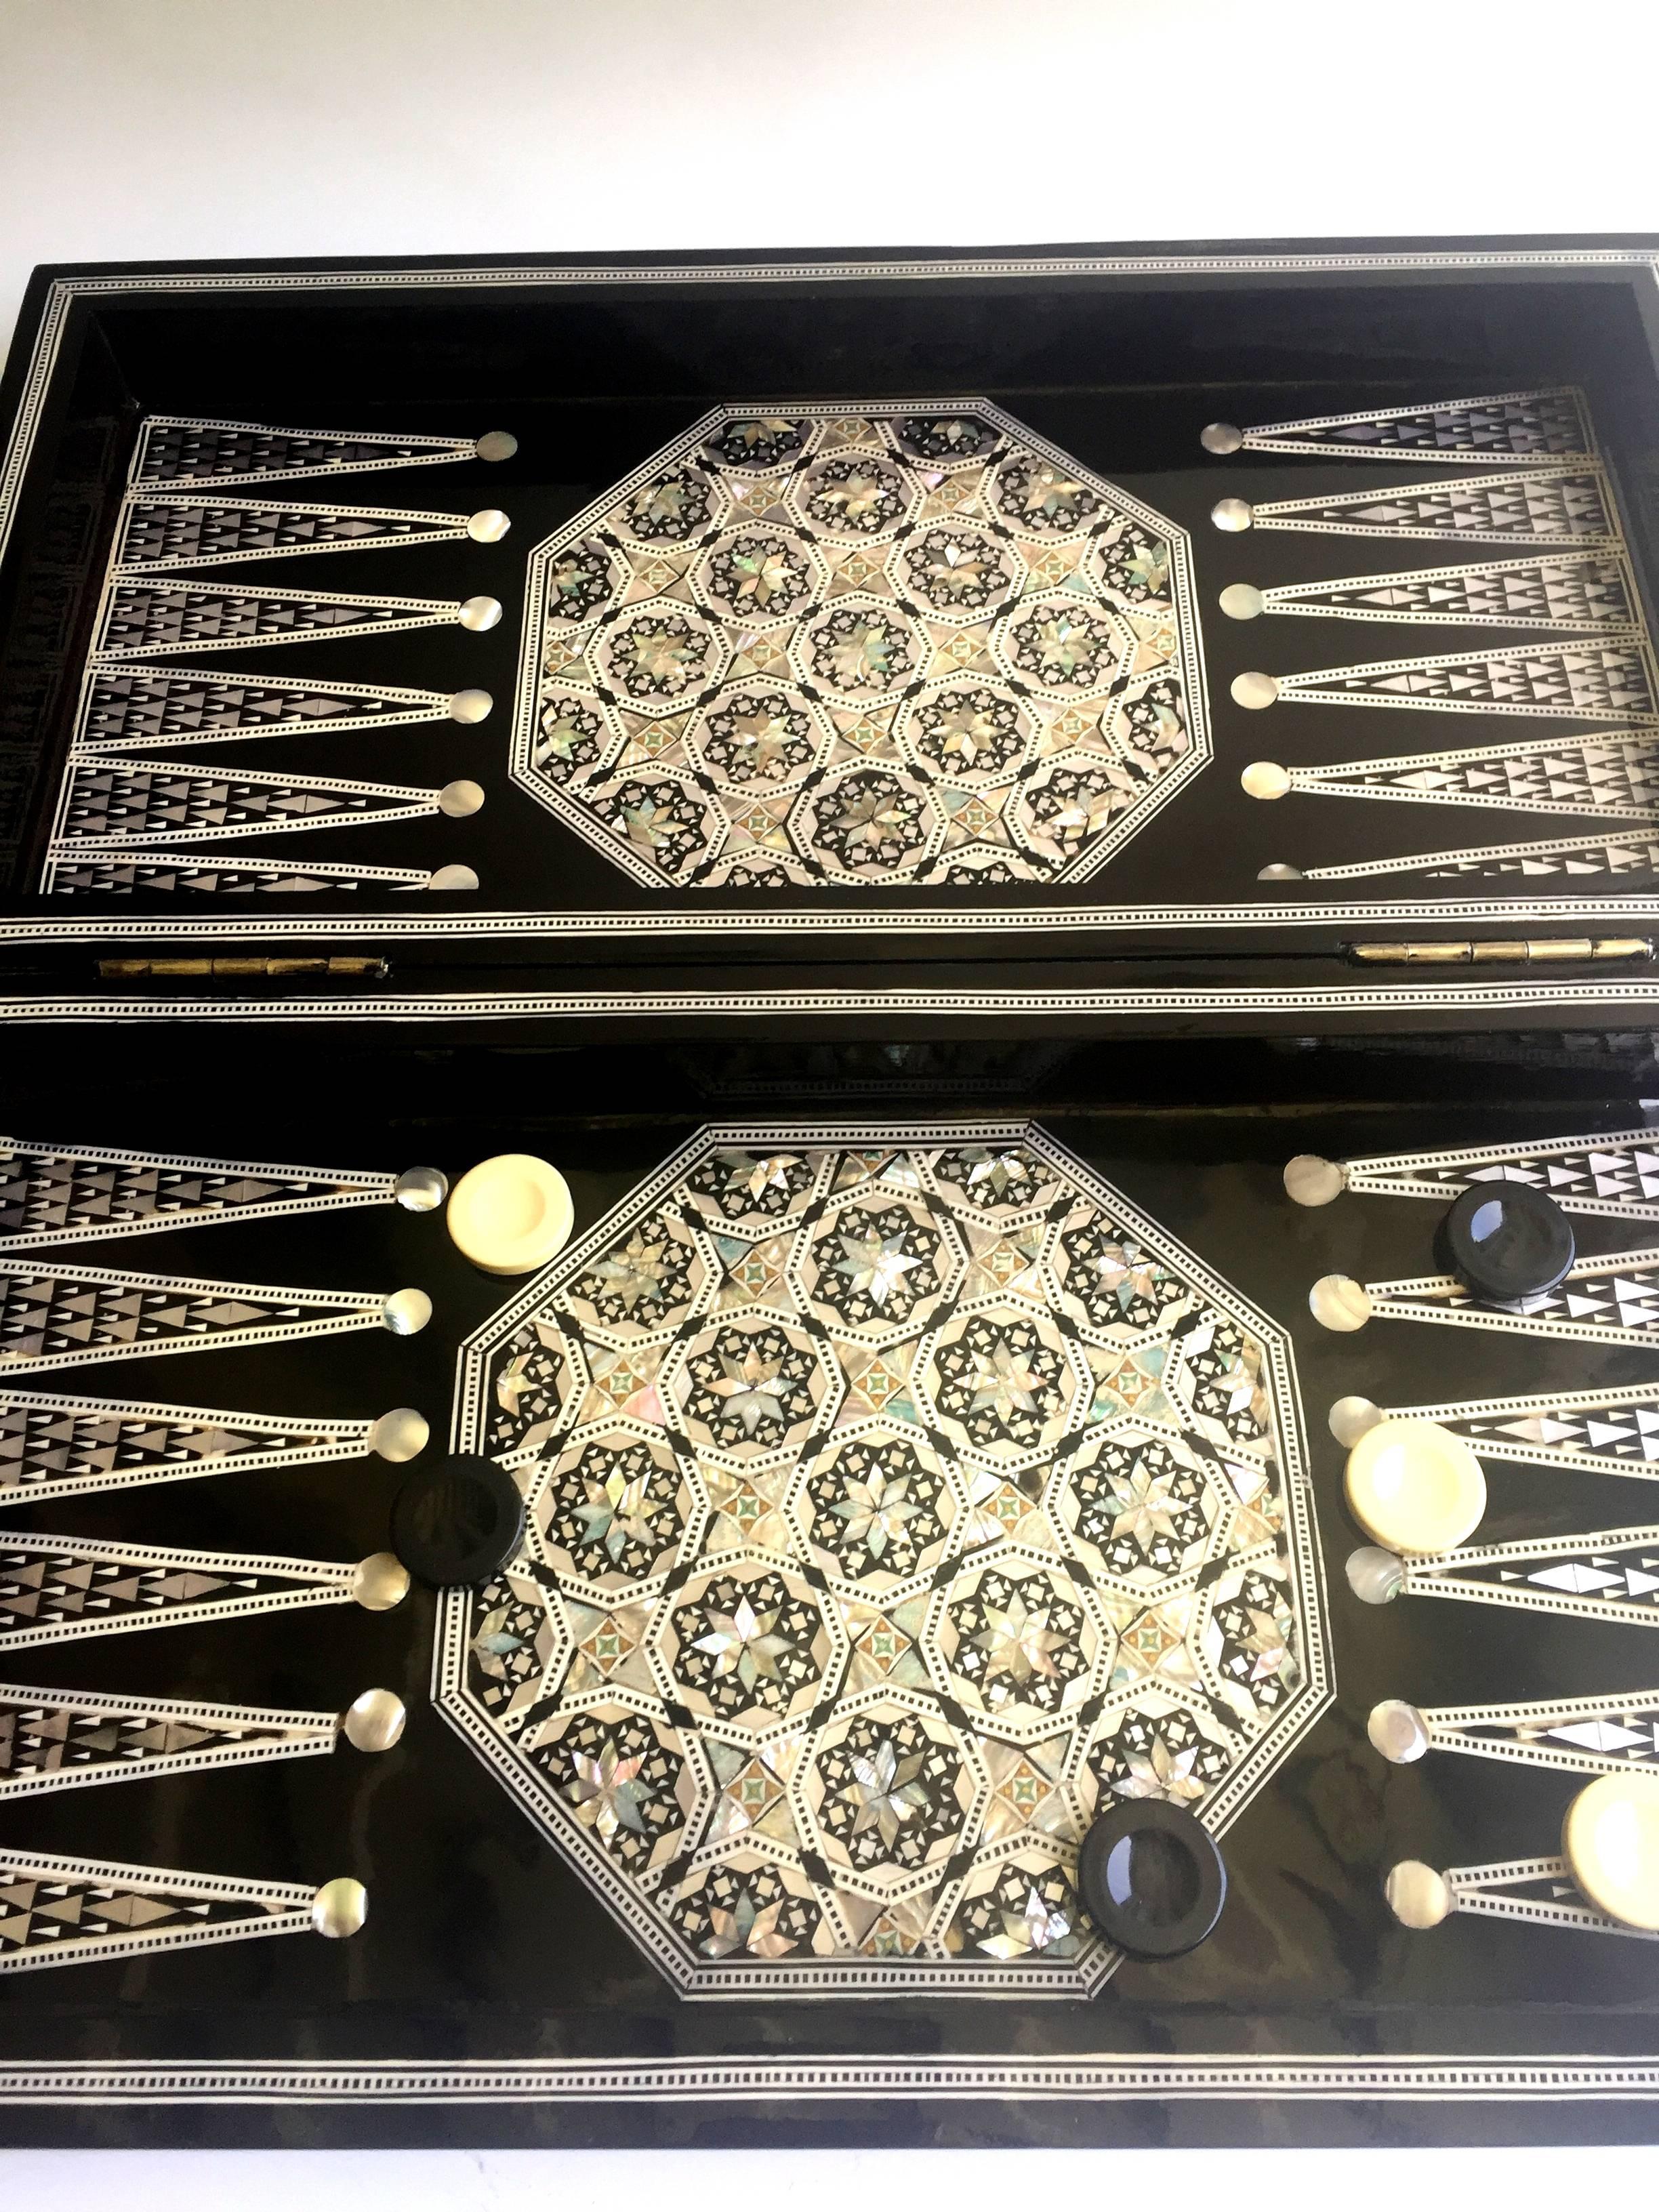 This is a double purpose game set which consists of both backgammon and chess. The craftsmanship on this beautiful piece is amazing. The wood box is entirely encrusted in genuine mother-of-pearl. The intricate pattern and Fine precision makes it a